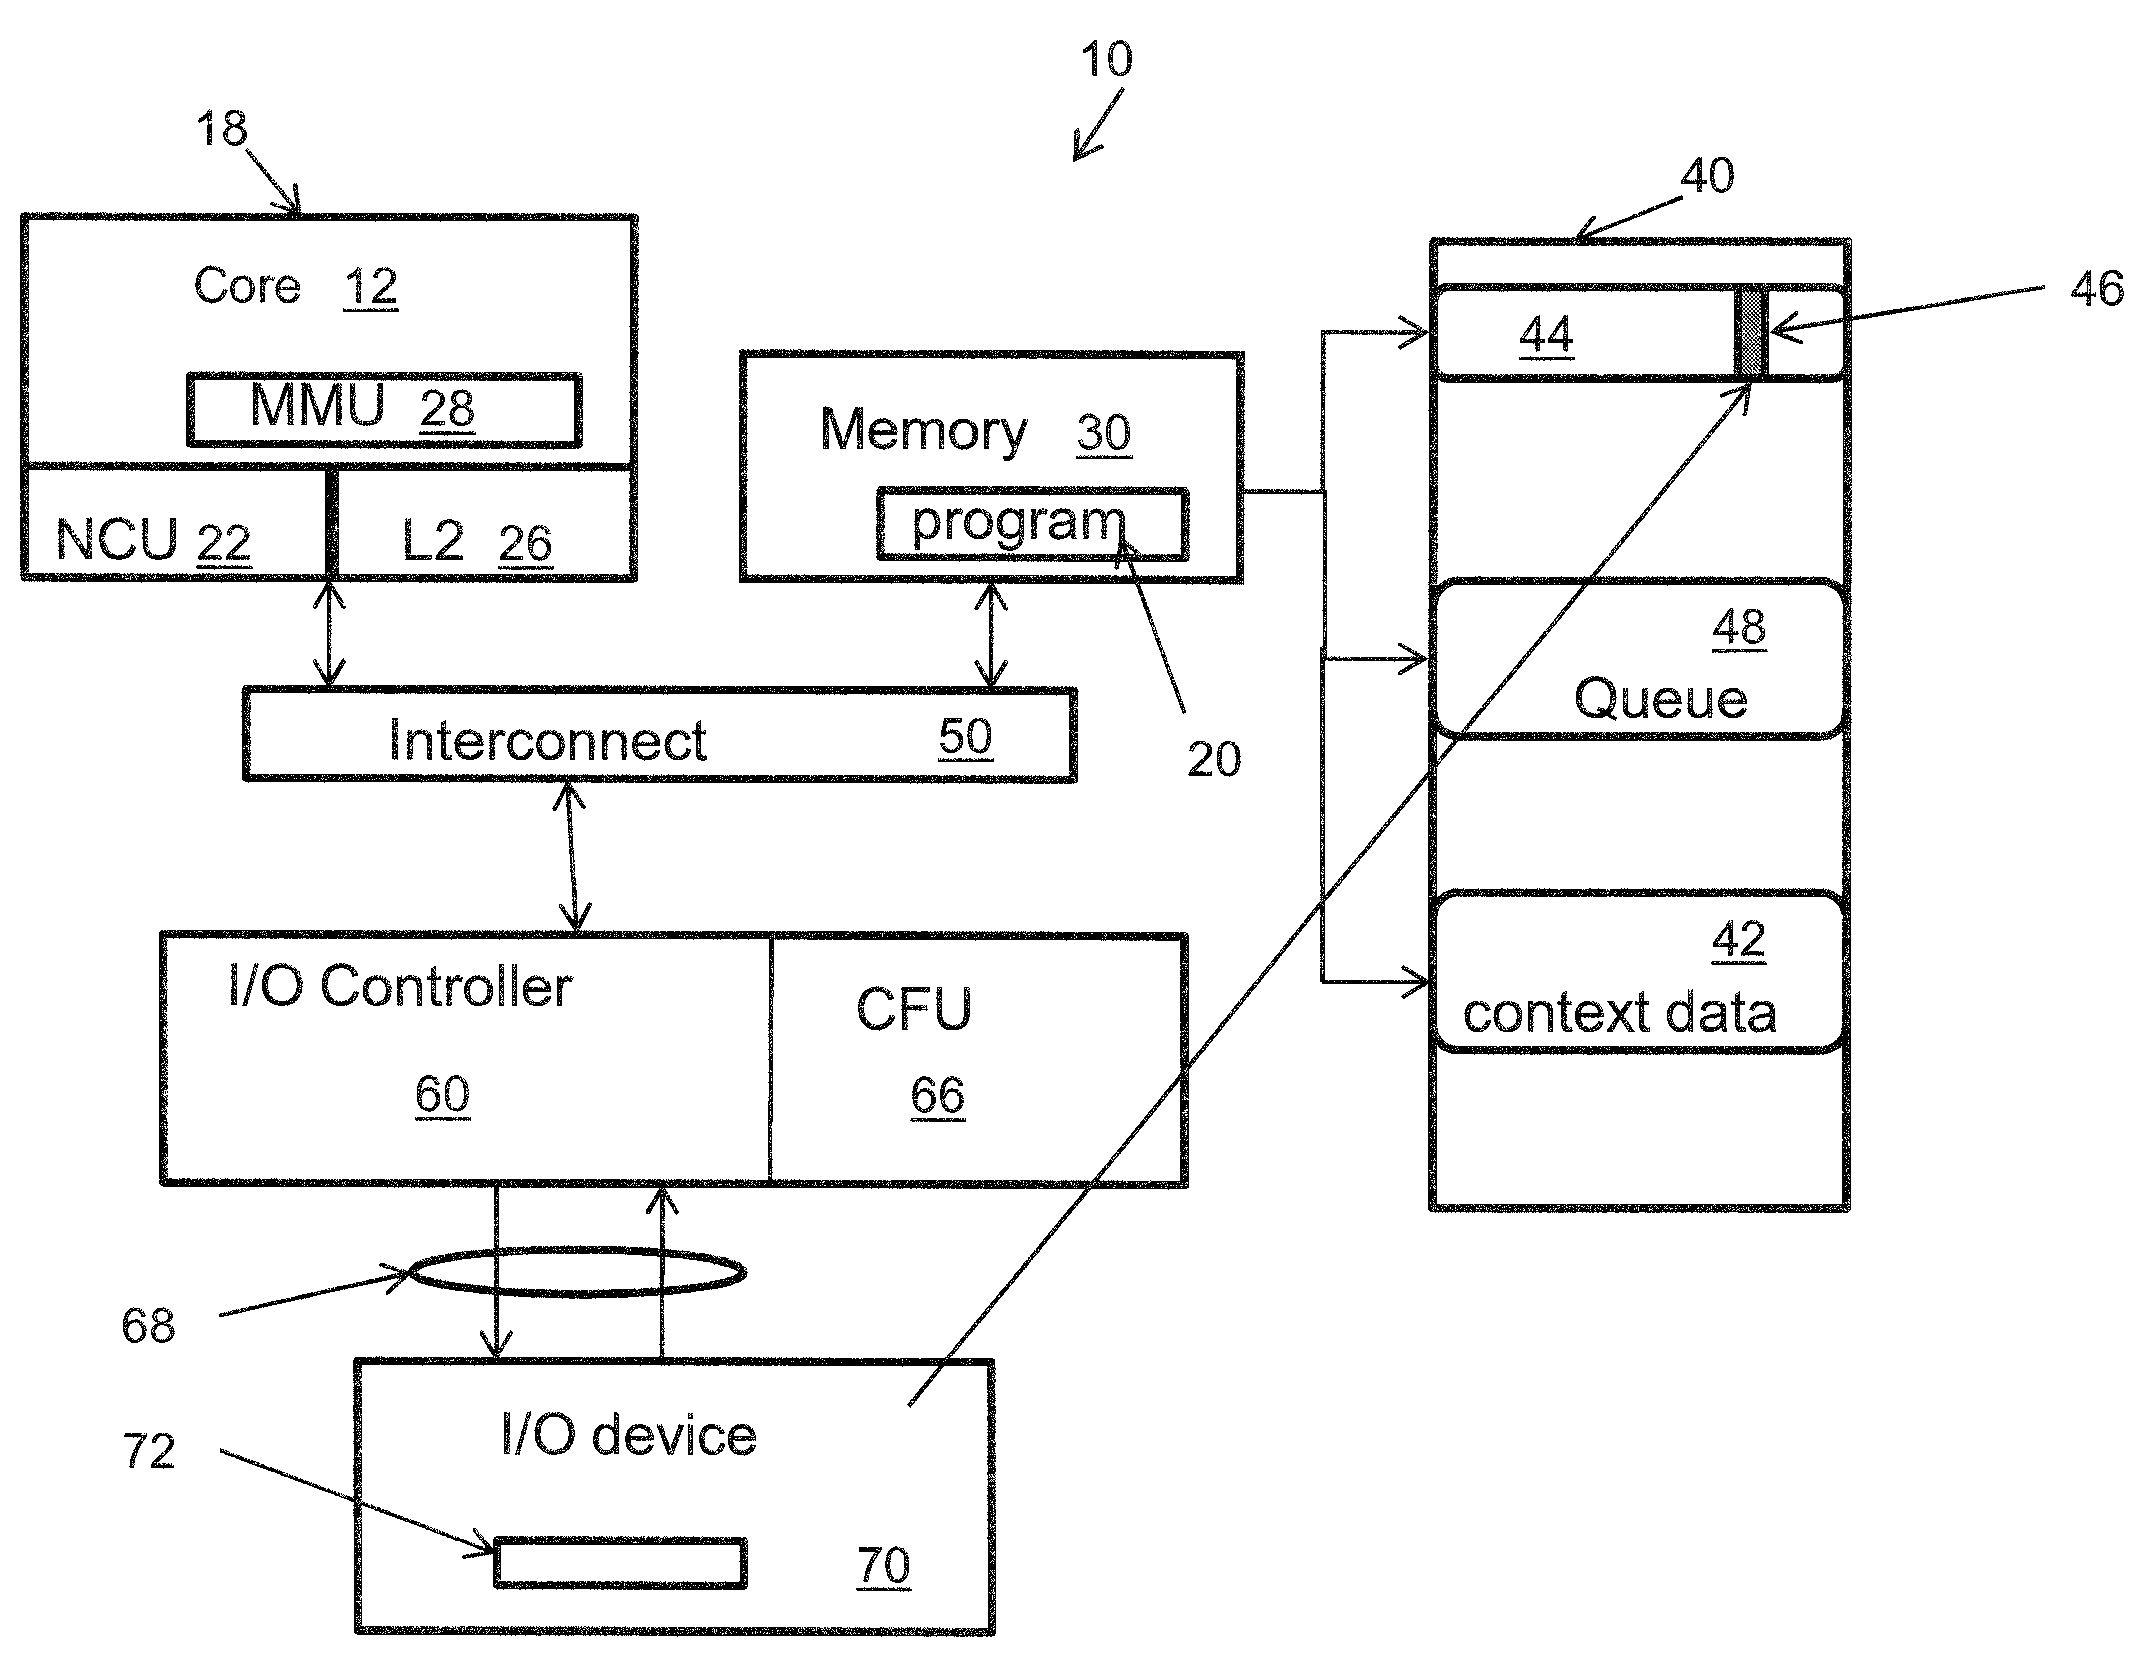 Method for pushing work request-associated contexts into an io device